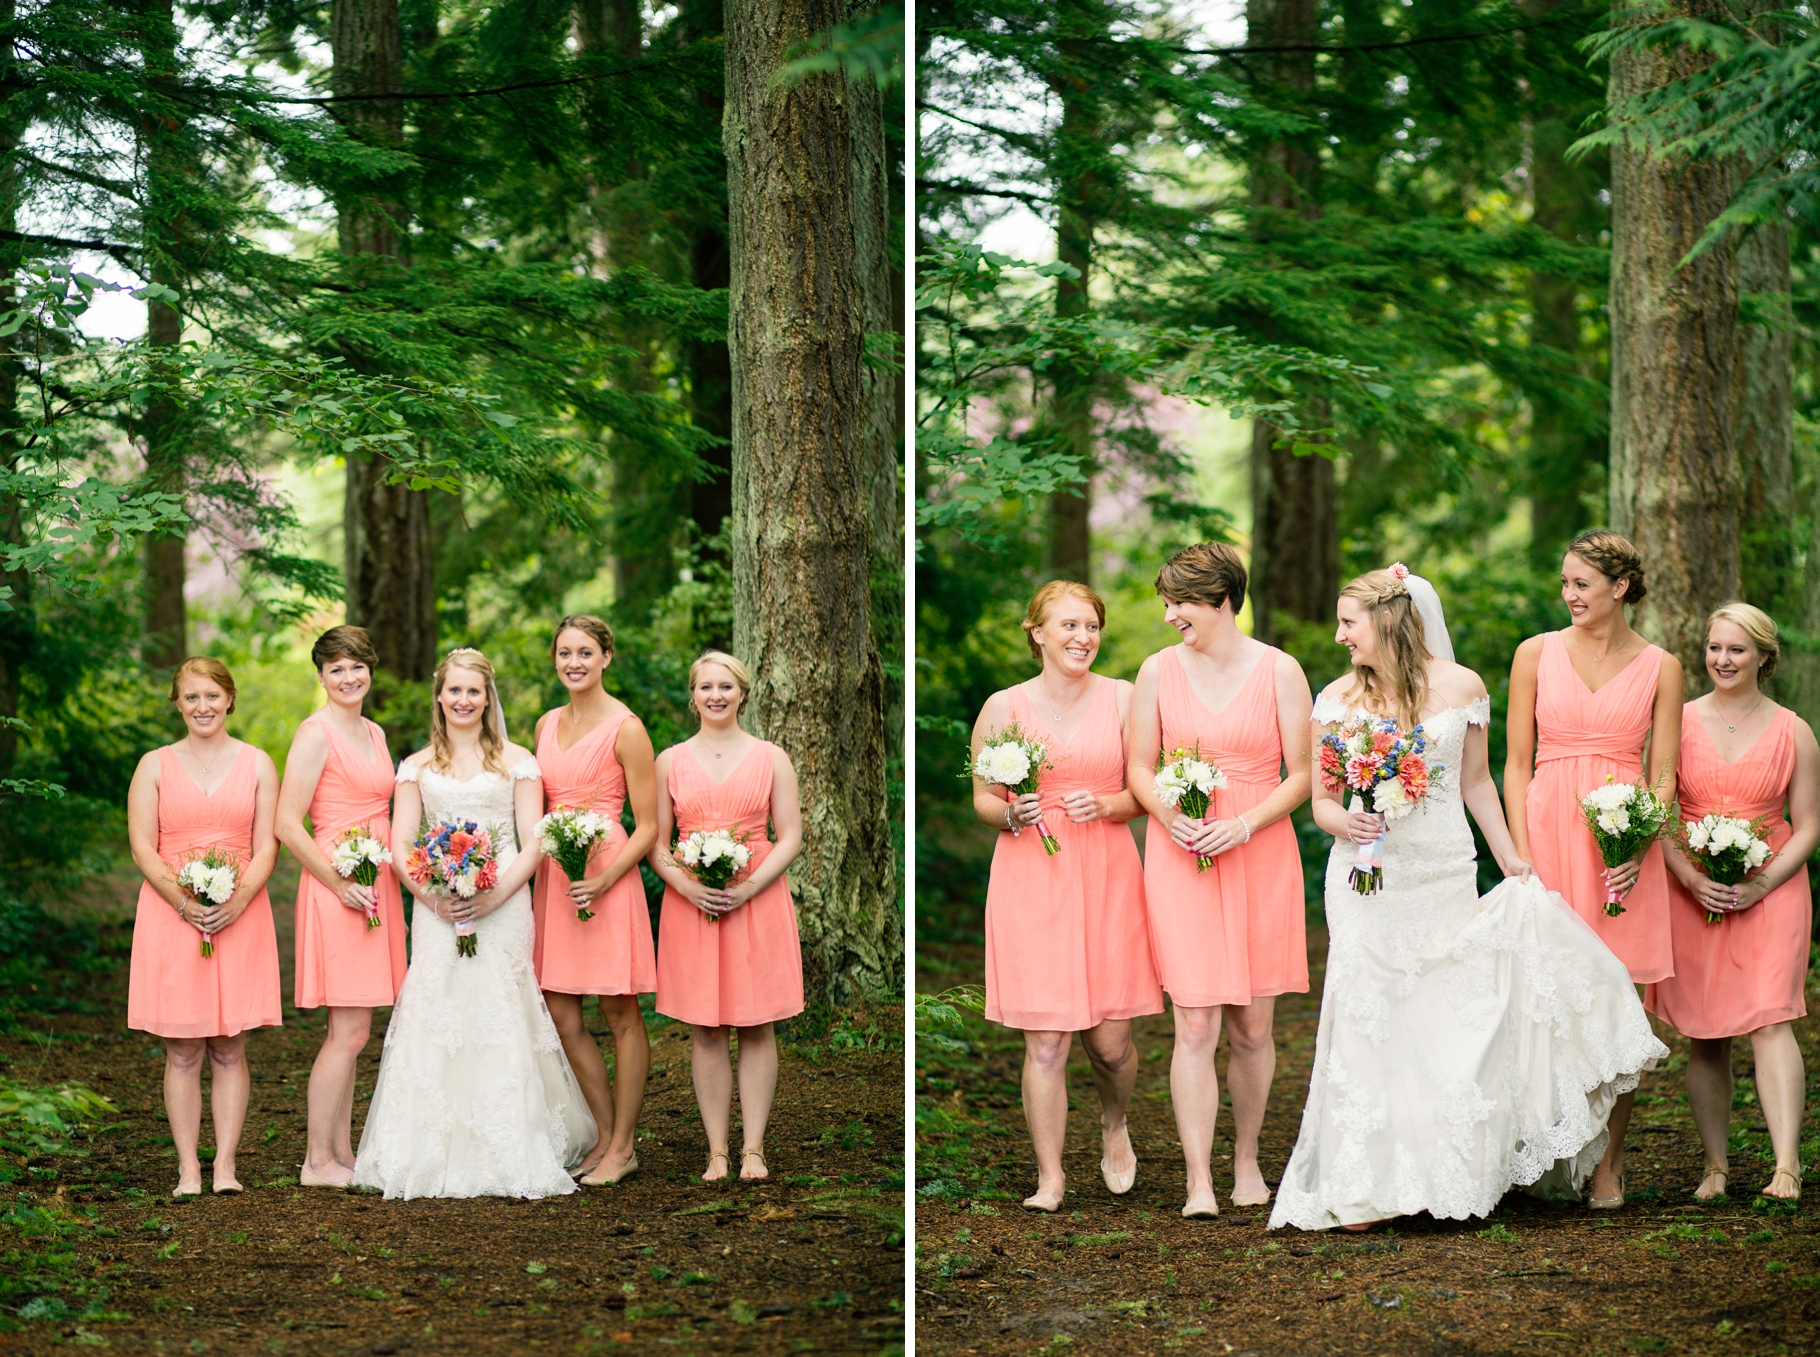 11-Bridesmaid-Portraits-Bridal-Bouquet-Flowers-Dahlias-Bride-wooded-bluff-olympic-mountains-log-cabin-Kitsap-Memorial-State-Park-Forest-Northwest-Photographer-Seattle-Wedding-Photography-by-Betty-Elaine